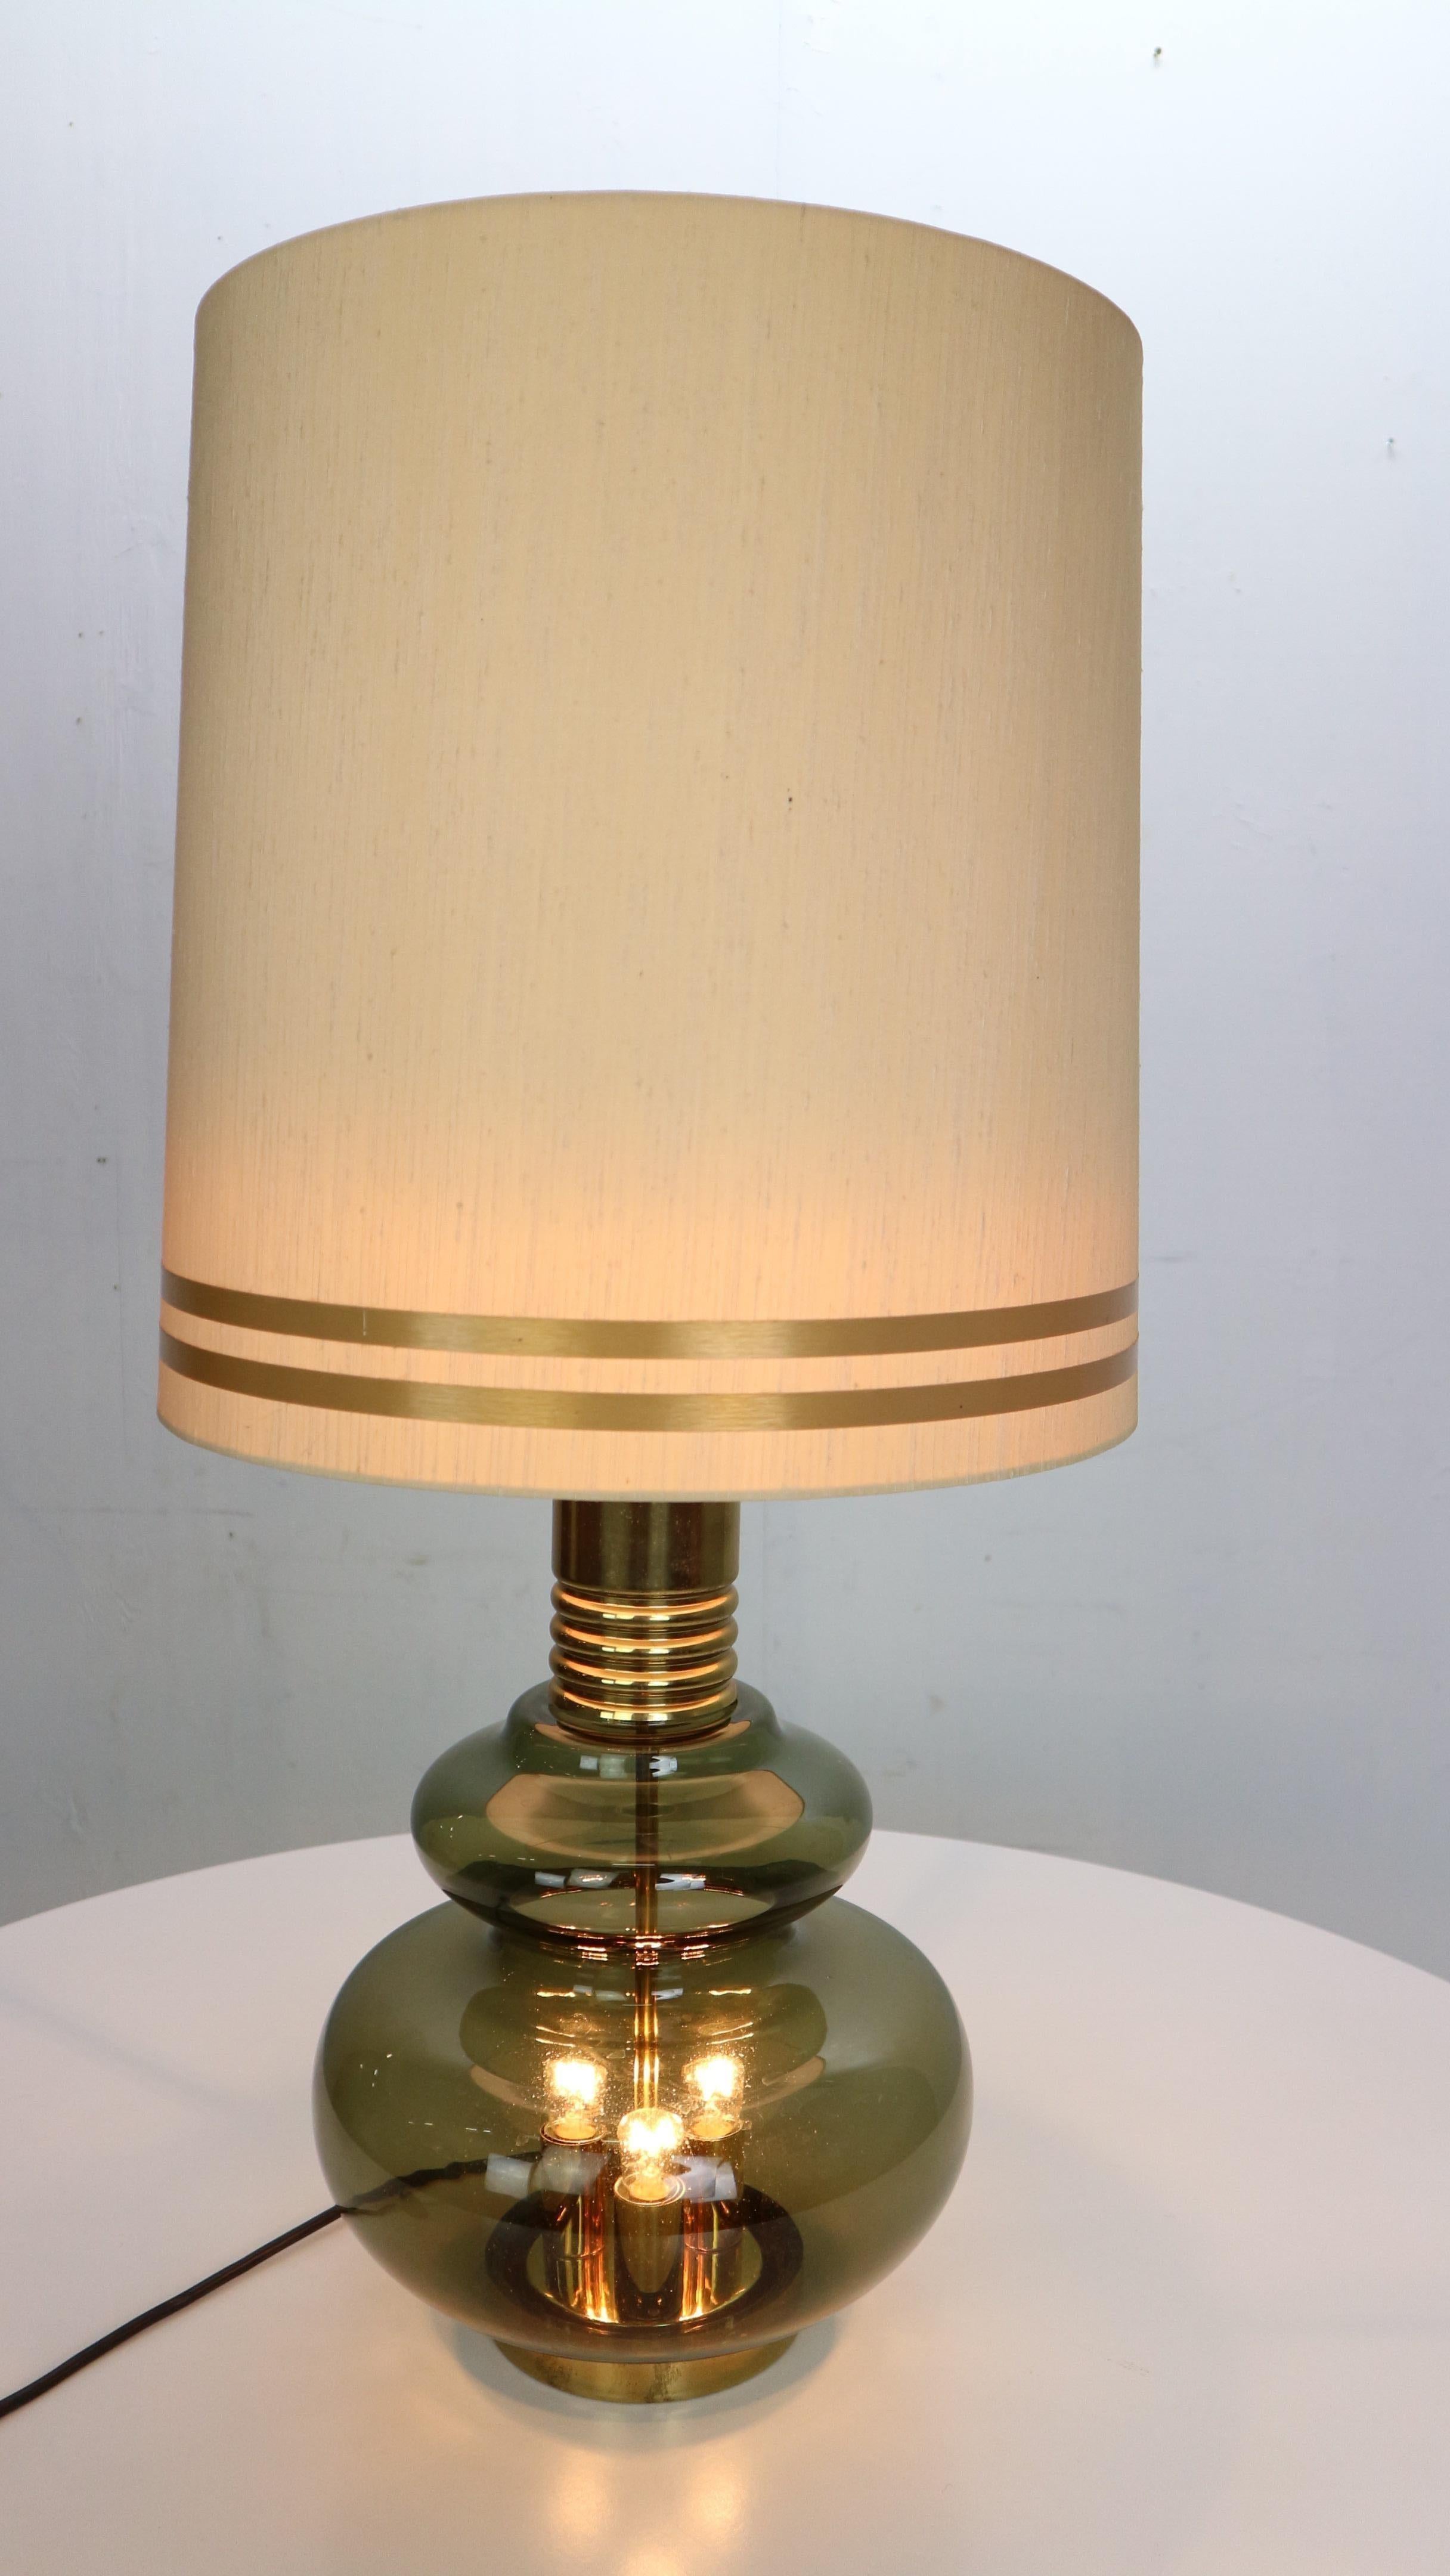 Table lamp manufactured by Doria Leuchten in Germany in the 1960's.
Structure in green glass with brass details. 
Three-lights in the glass bottom and one light under the shade (sand color with golden details), with a light switch you can adjust